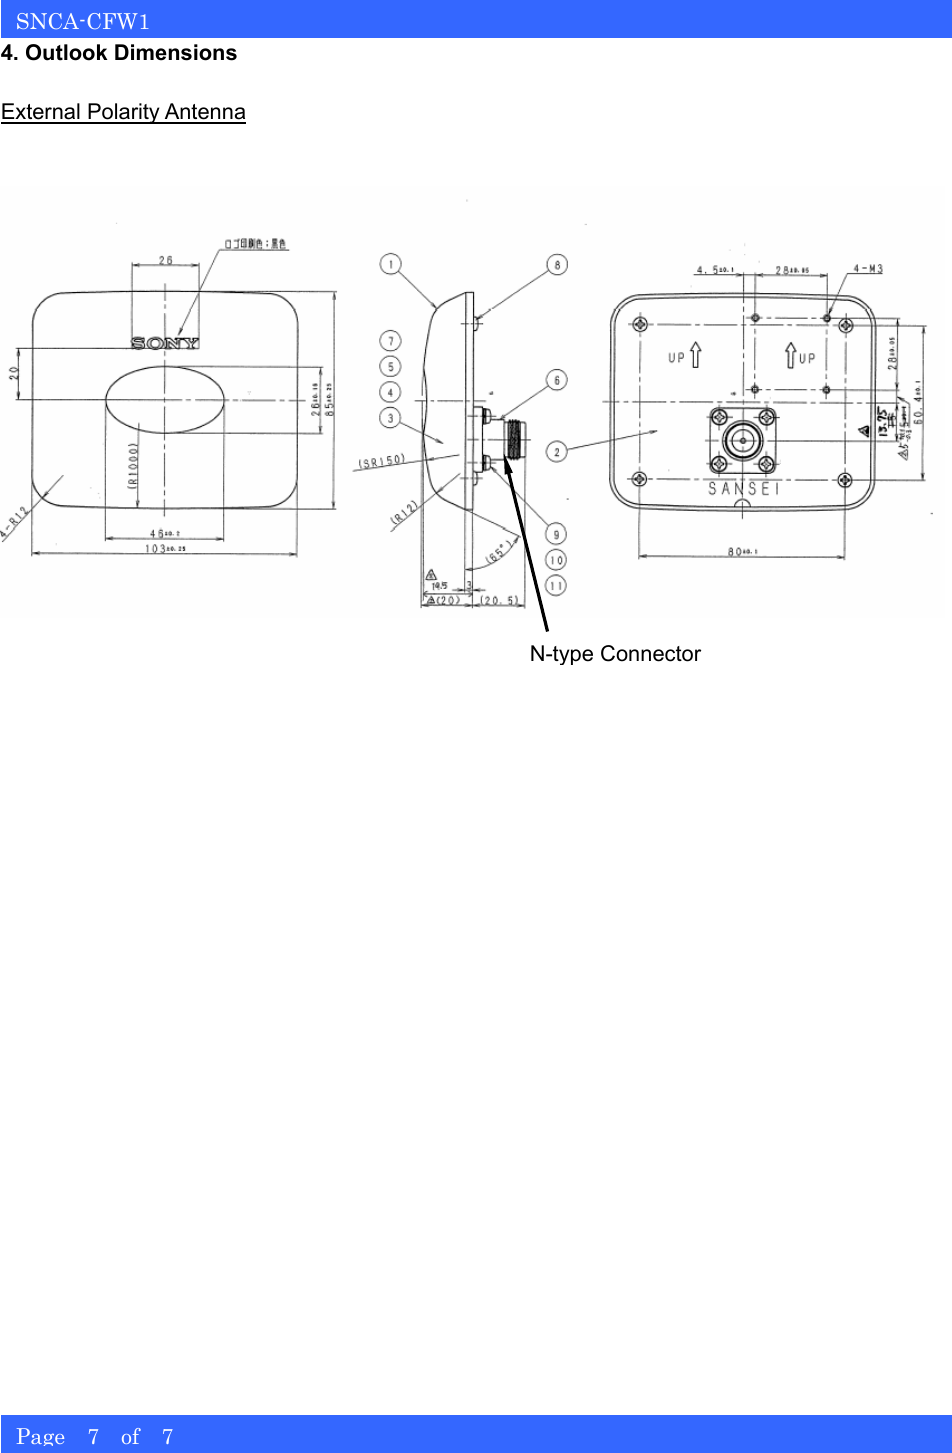   SNCA-CFW1 Page  7  of  7 4. Outlook Dimensions  External Polarity Antenna  N-type Connector